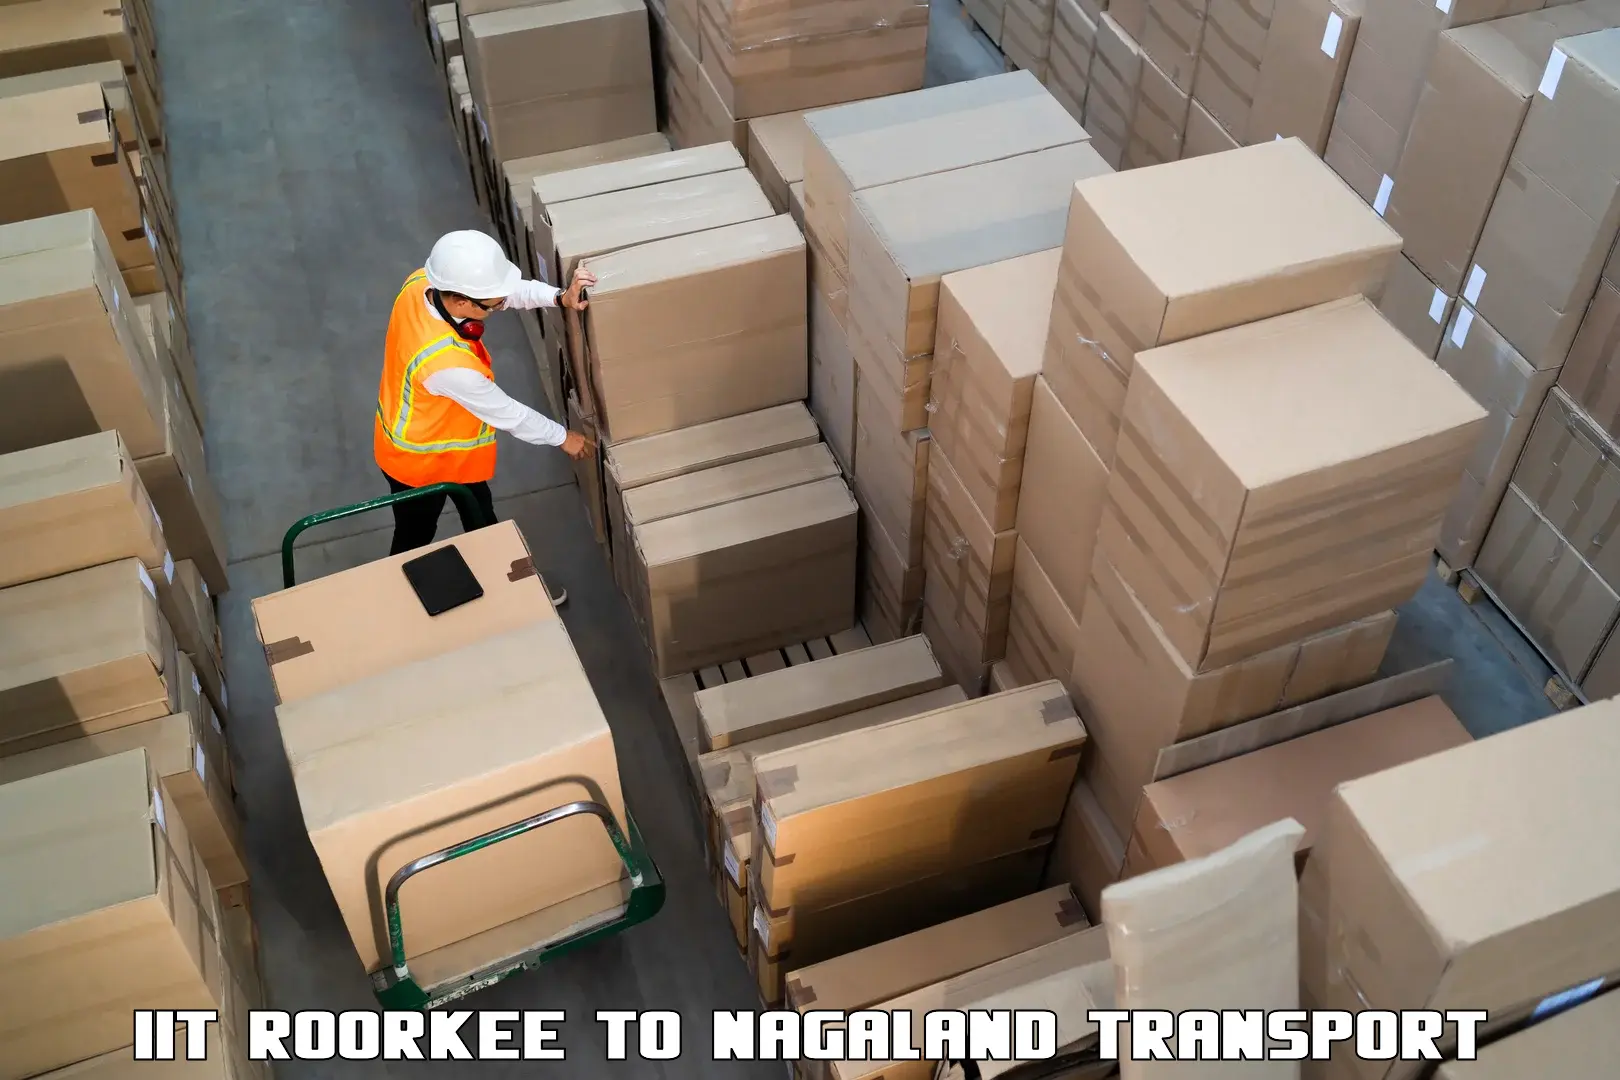 Luggage transport services IIT Roorkee to NIT Nagaland